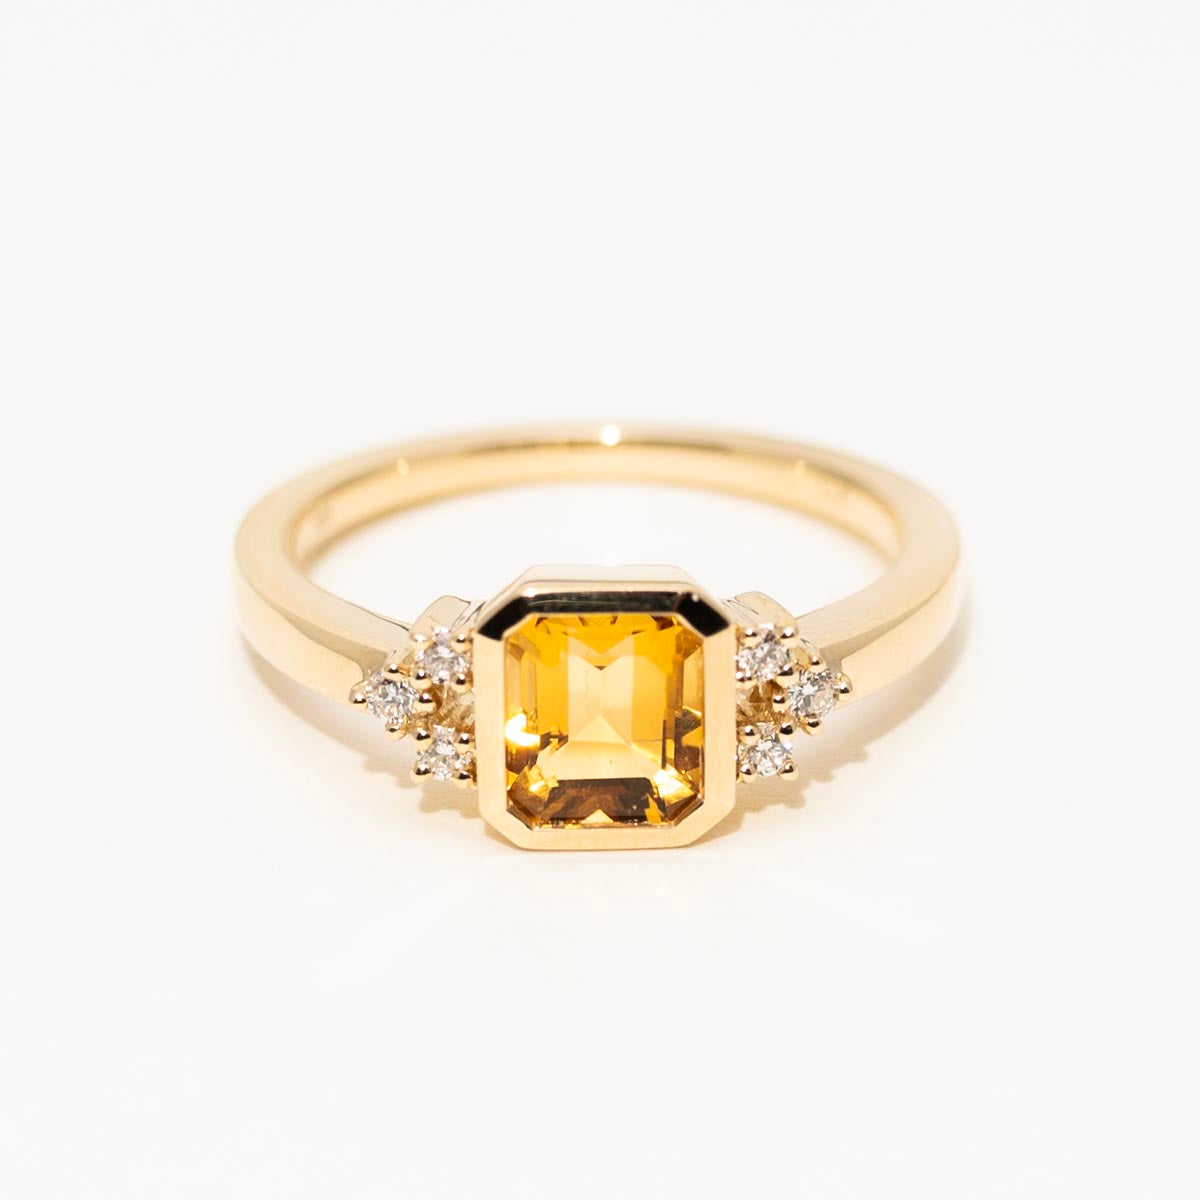 Emerald Cut Citrine Ring in 14kt Yellow Gold  with Diamonds (1/10ct tw)